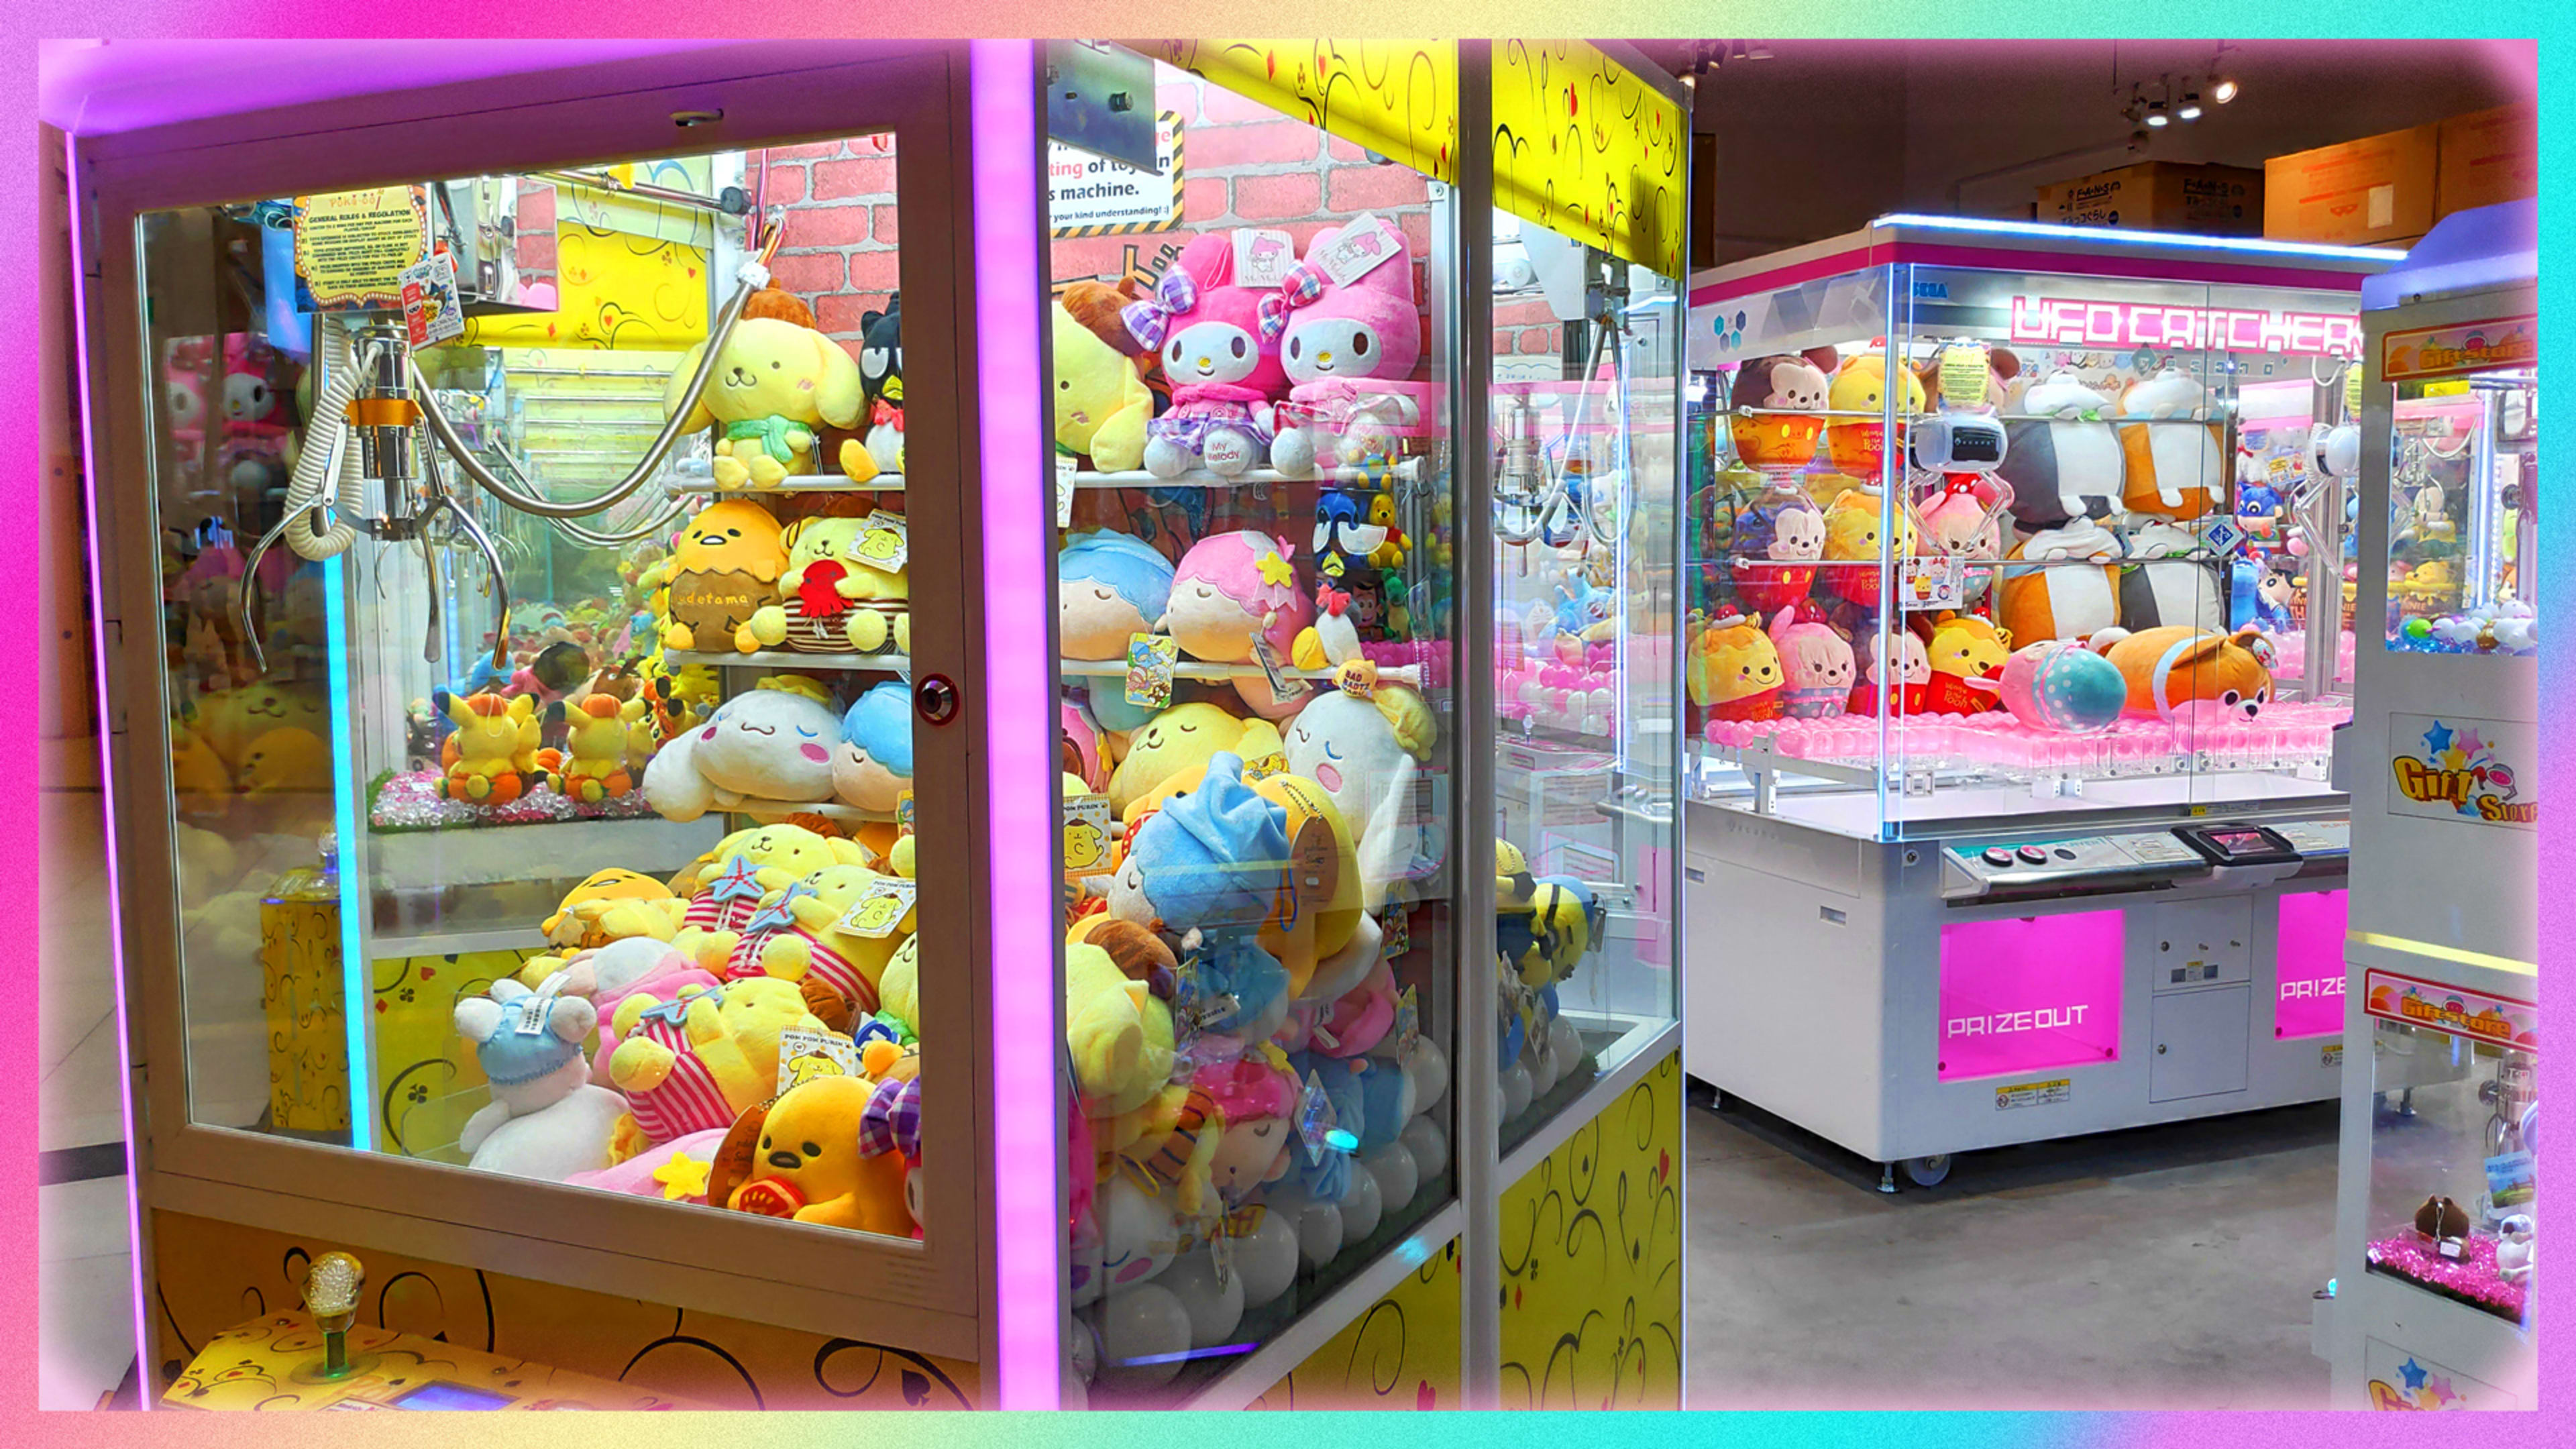 Now you can remote-control a real claw game from your smartphone